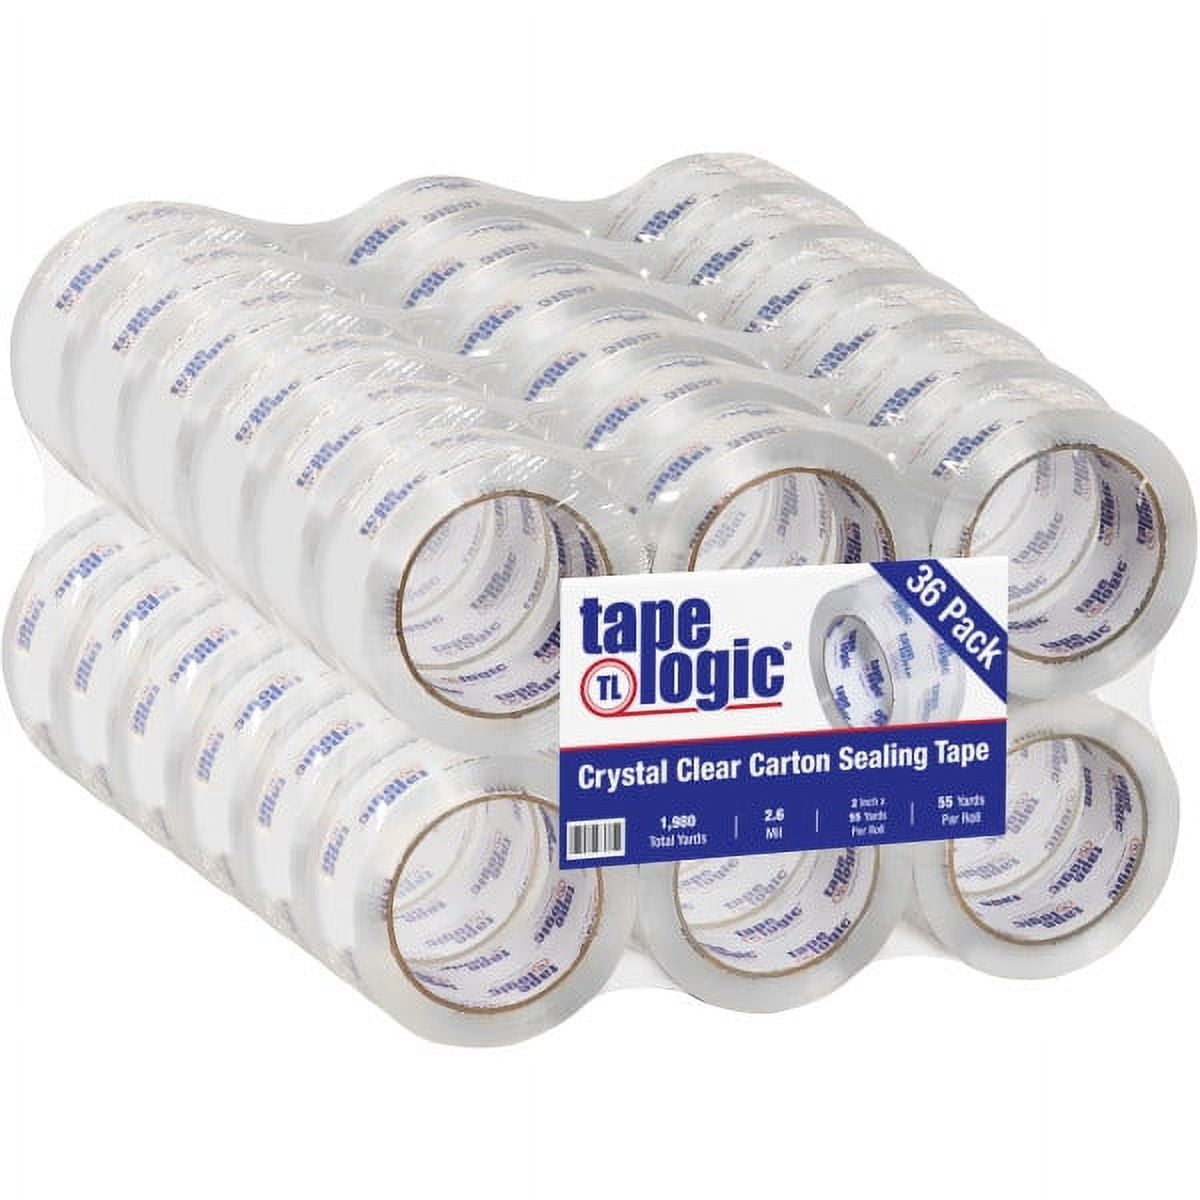 Tape Logic T901260cc 2 In. X 55 Yards Crystal Clear No.260cc Tape - Case Of 36